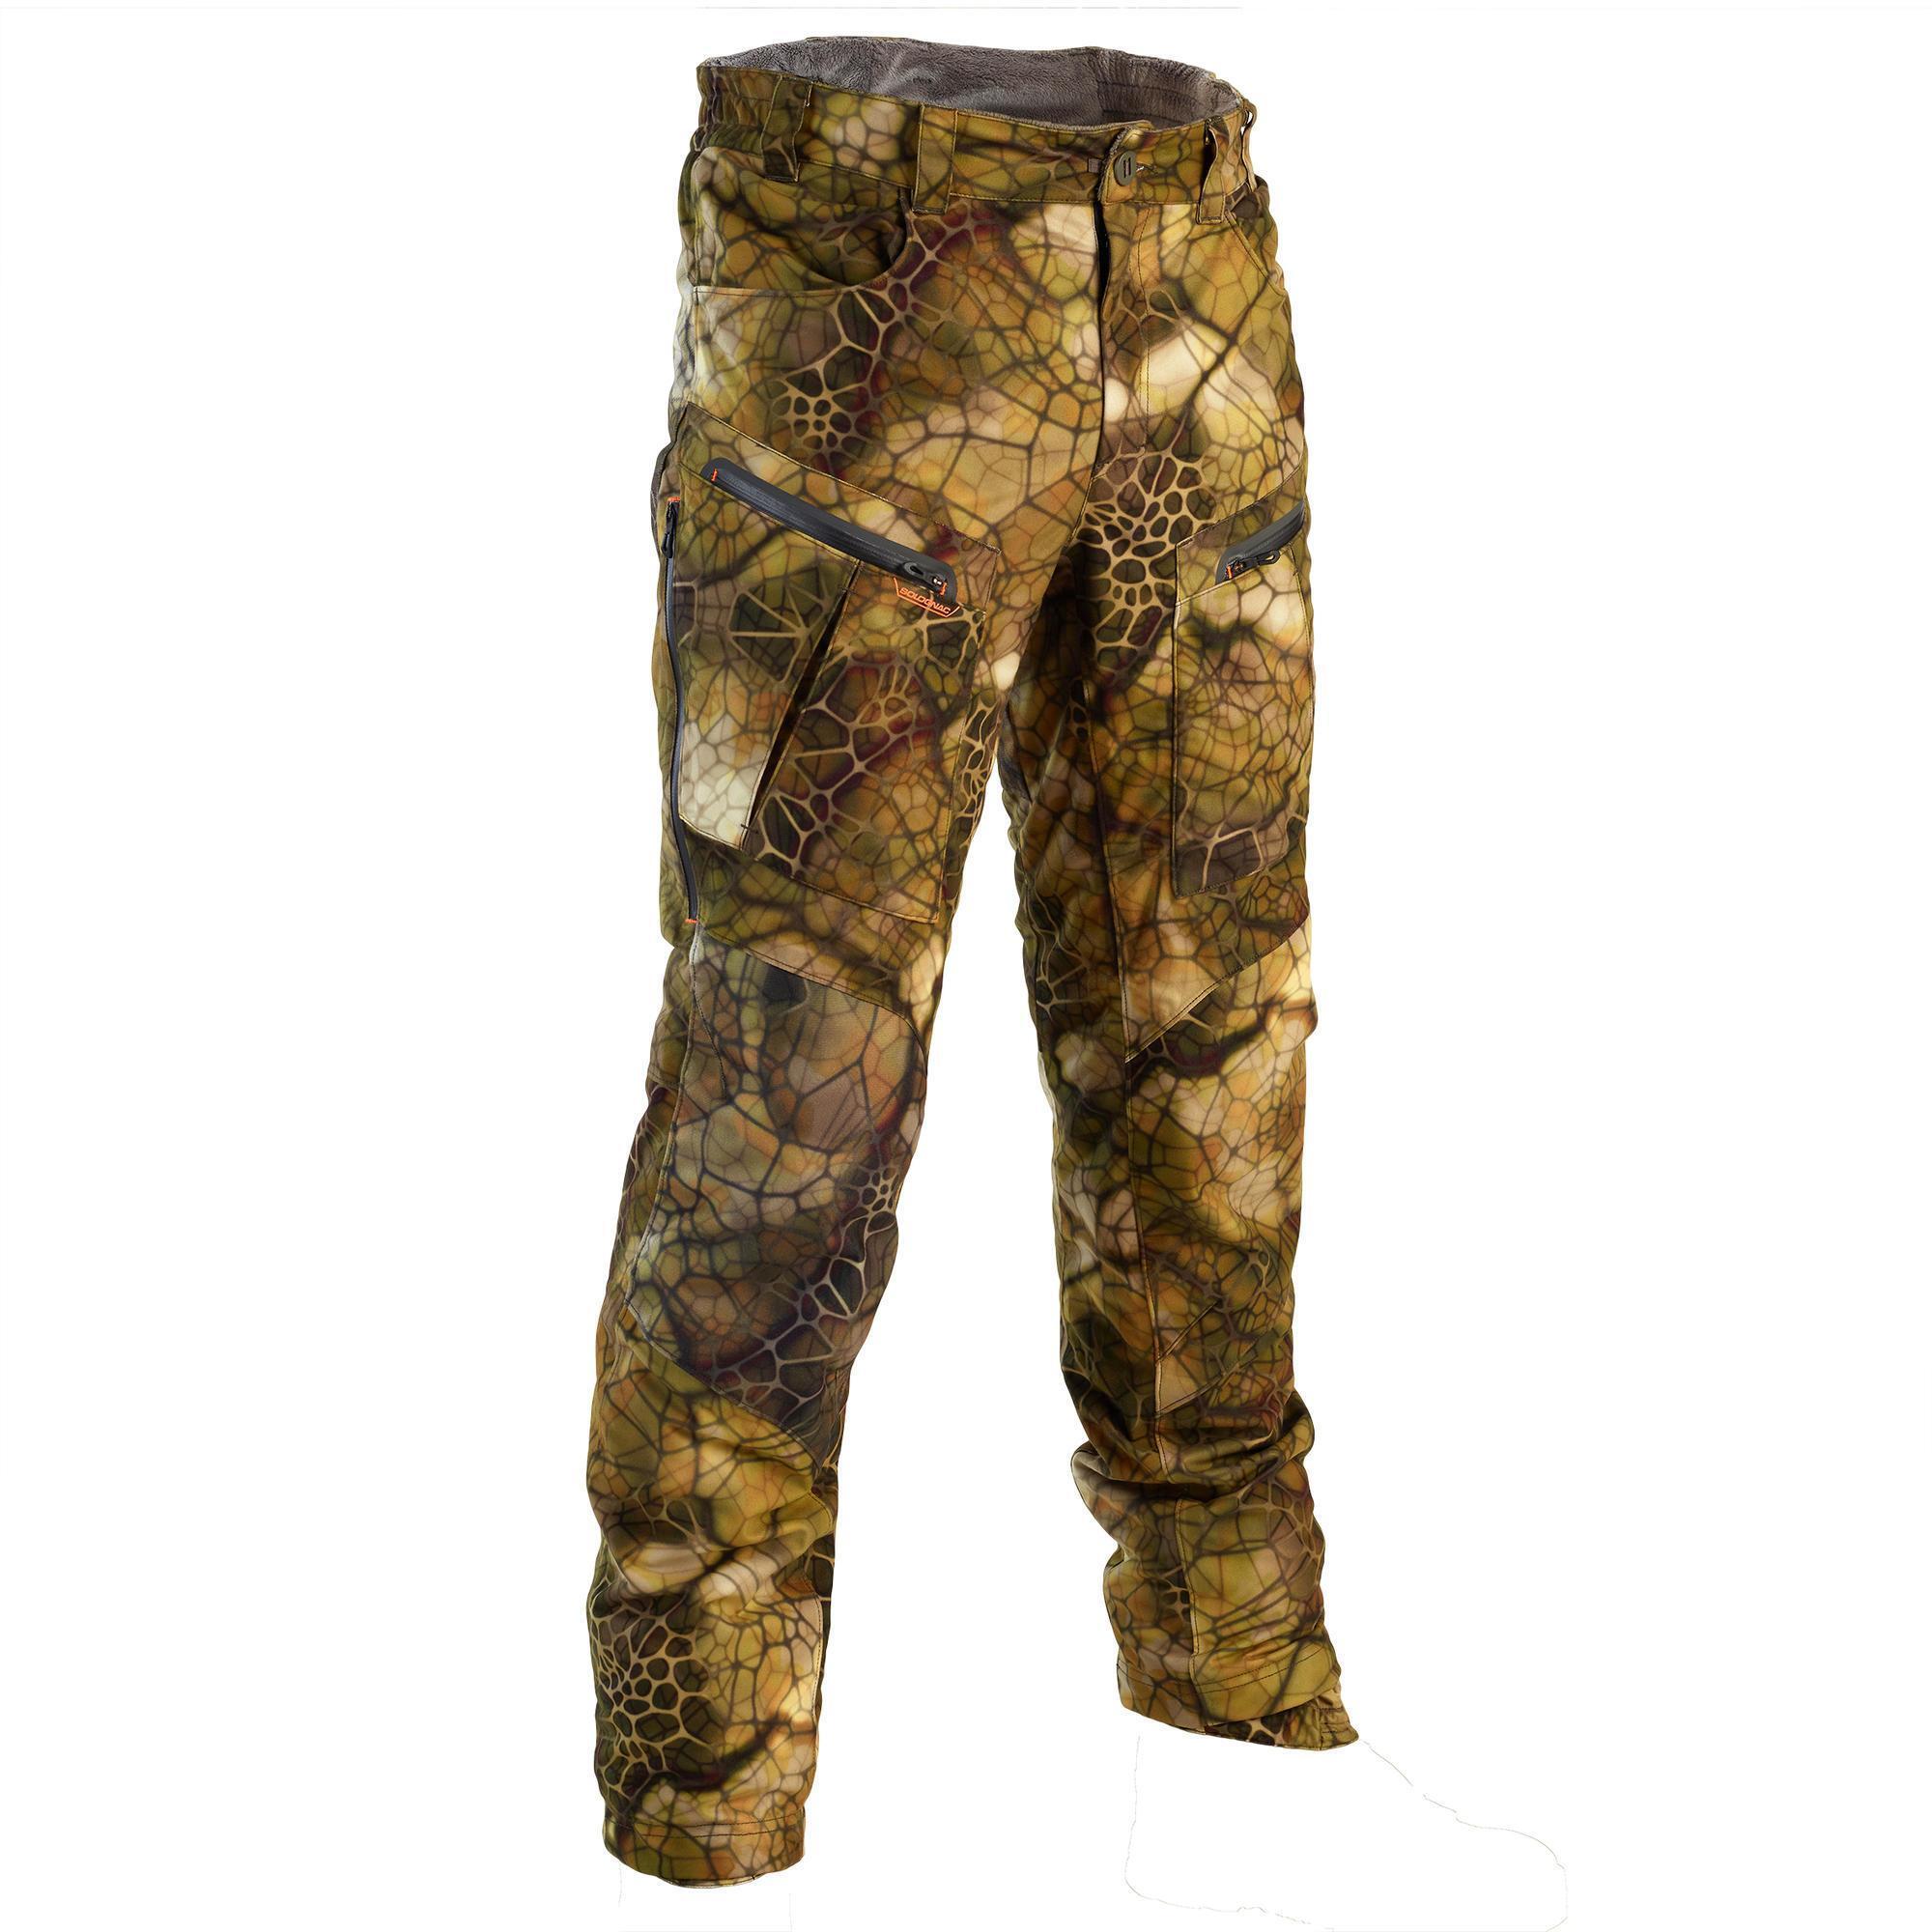 SOLOGNAC Warm and Silent Waterproof Trousers - Camo